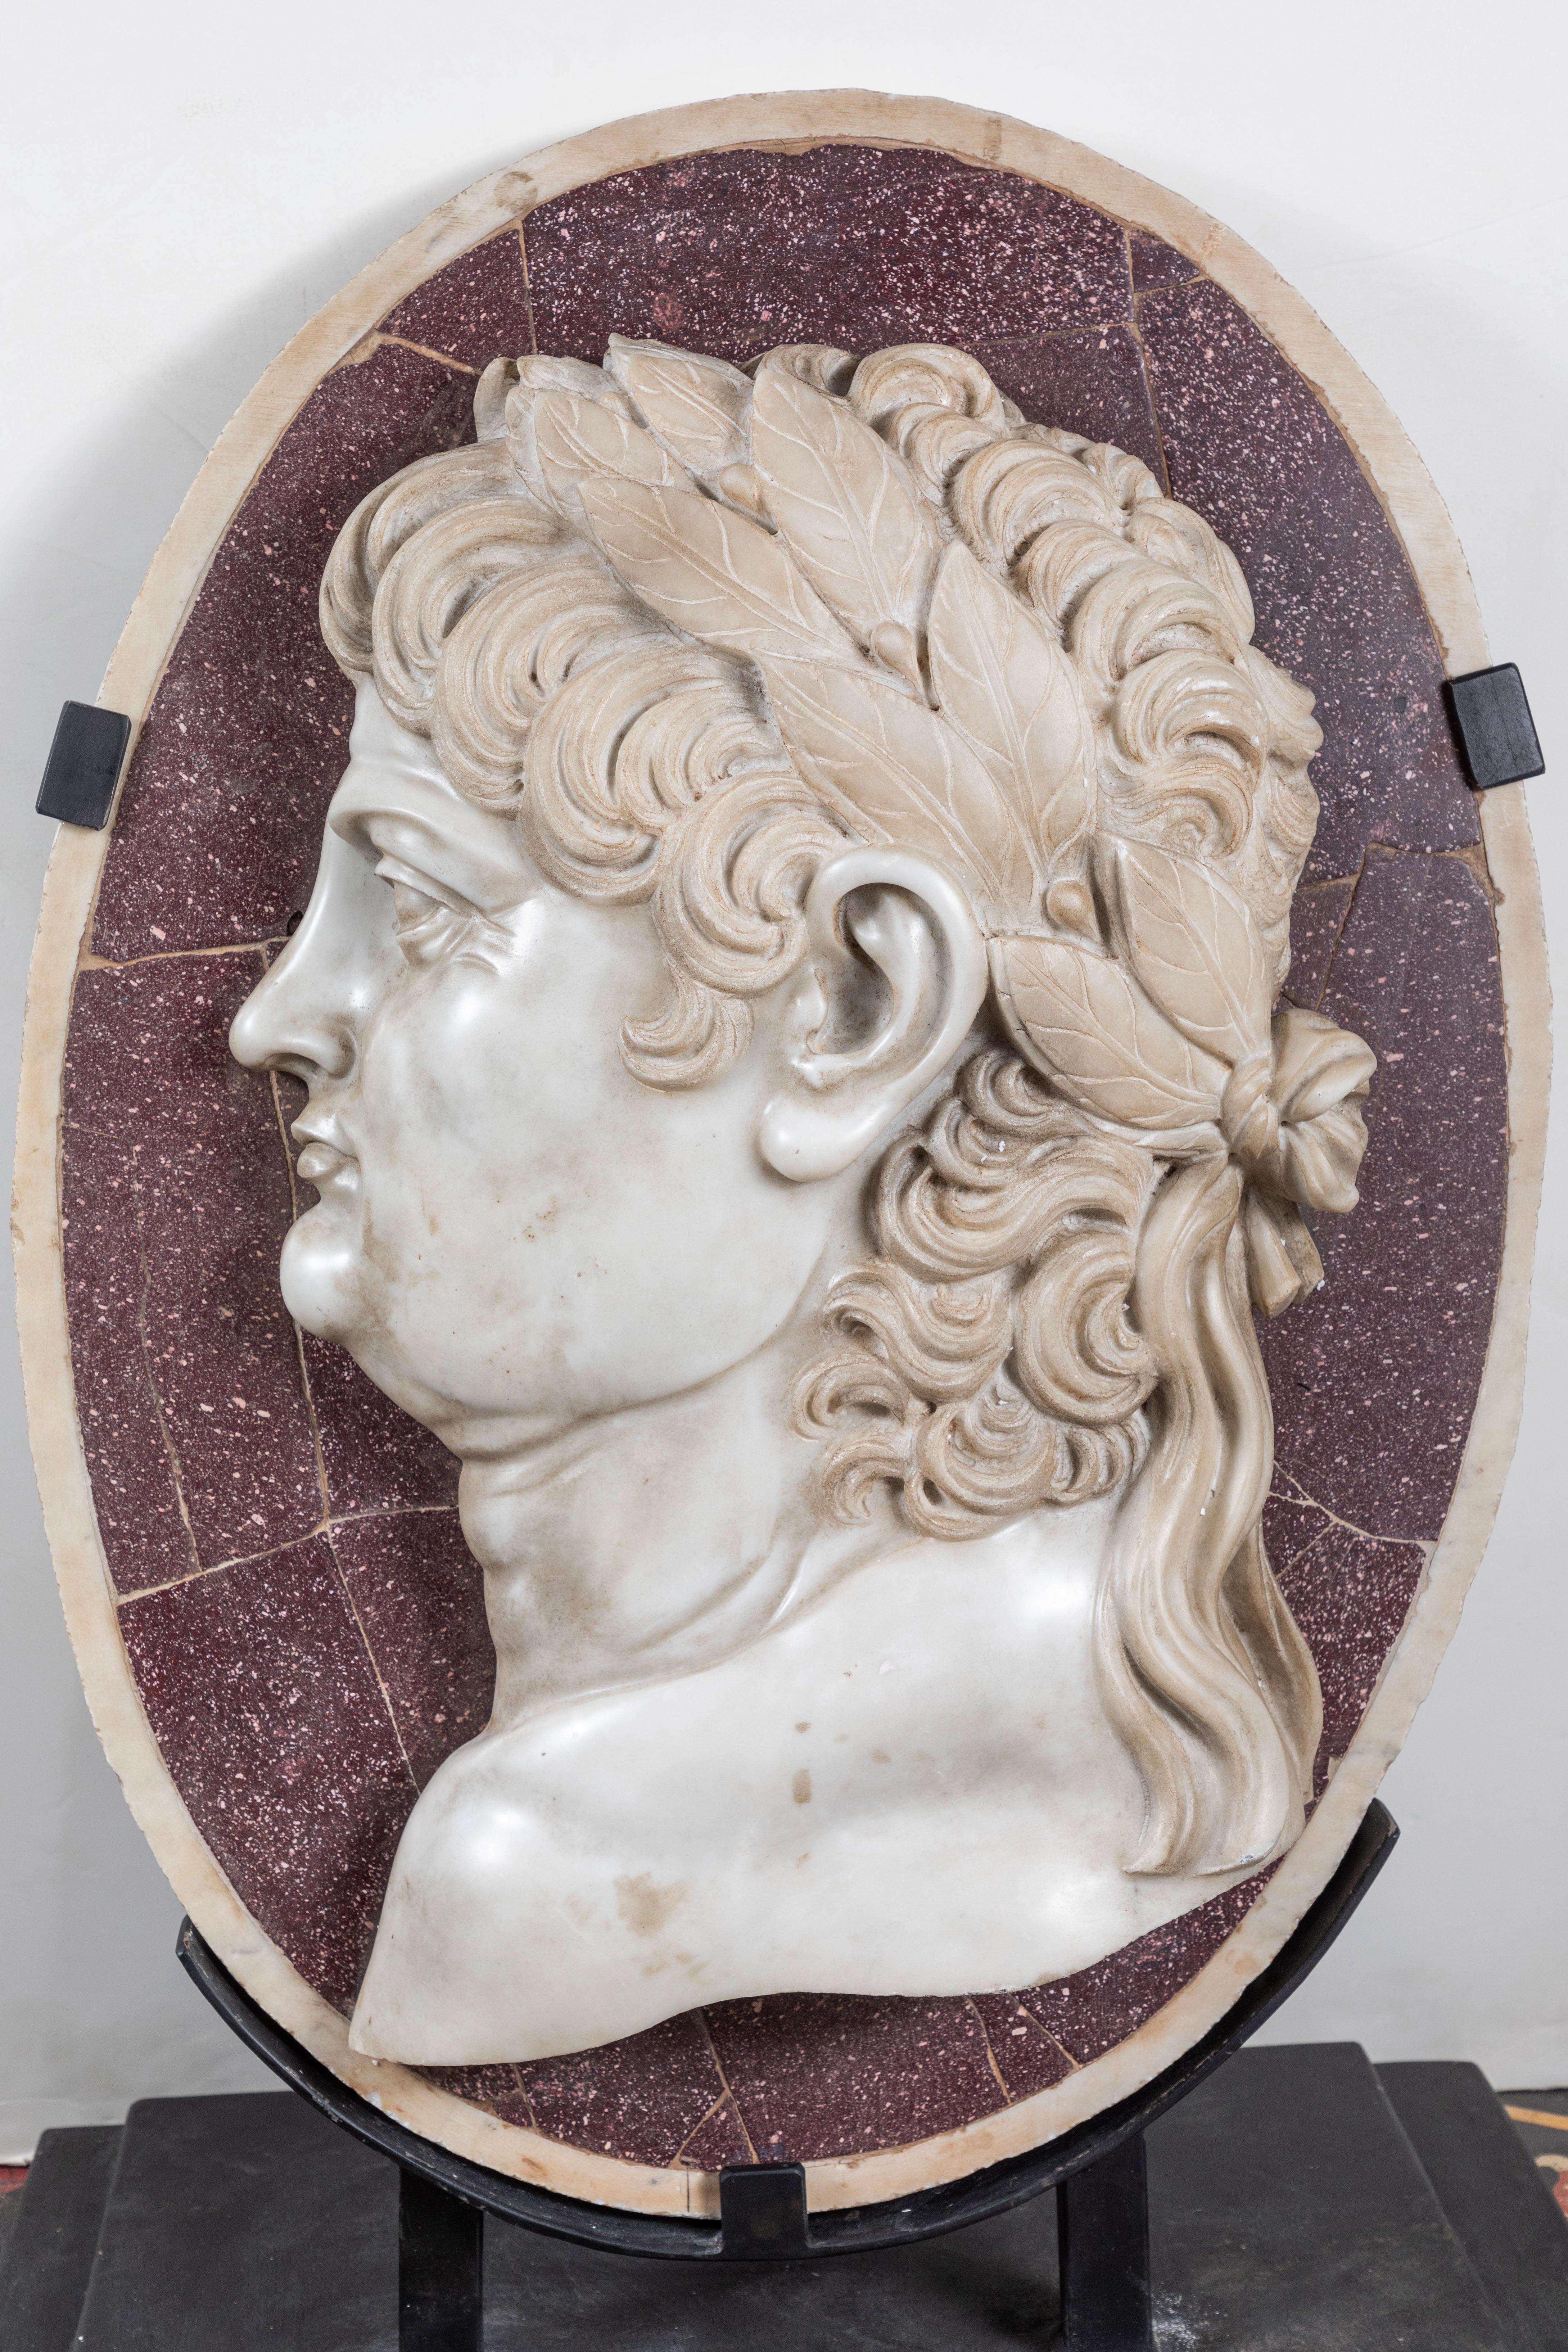 Grand scale and regal, circa 1860, hand carved Carrara marble relief medallion featuring the profile of a senator with flowing hair crowned in laurels. He is surrounded by a porphyry veneer and mounted on a custom, steel stand. Made in Rome and then